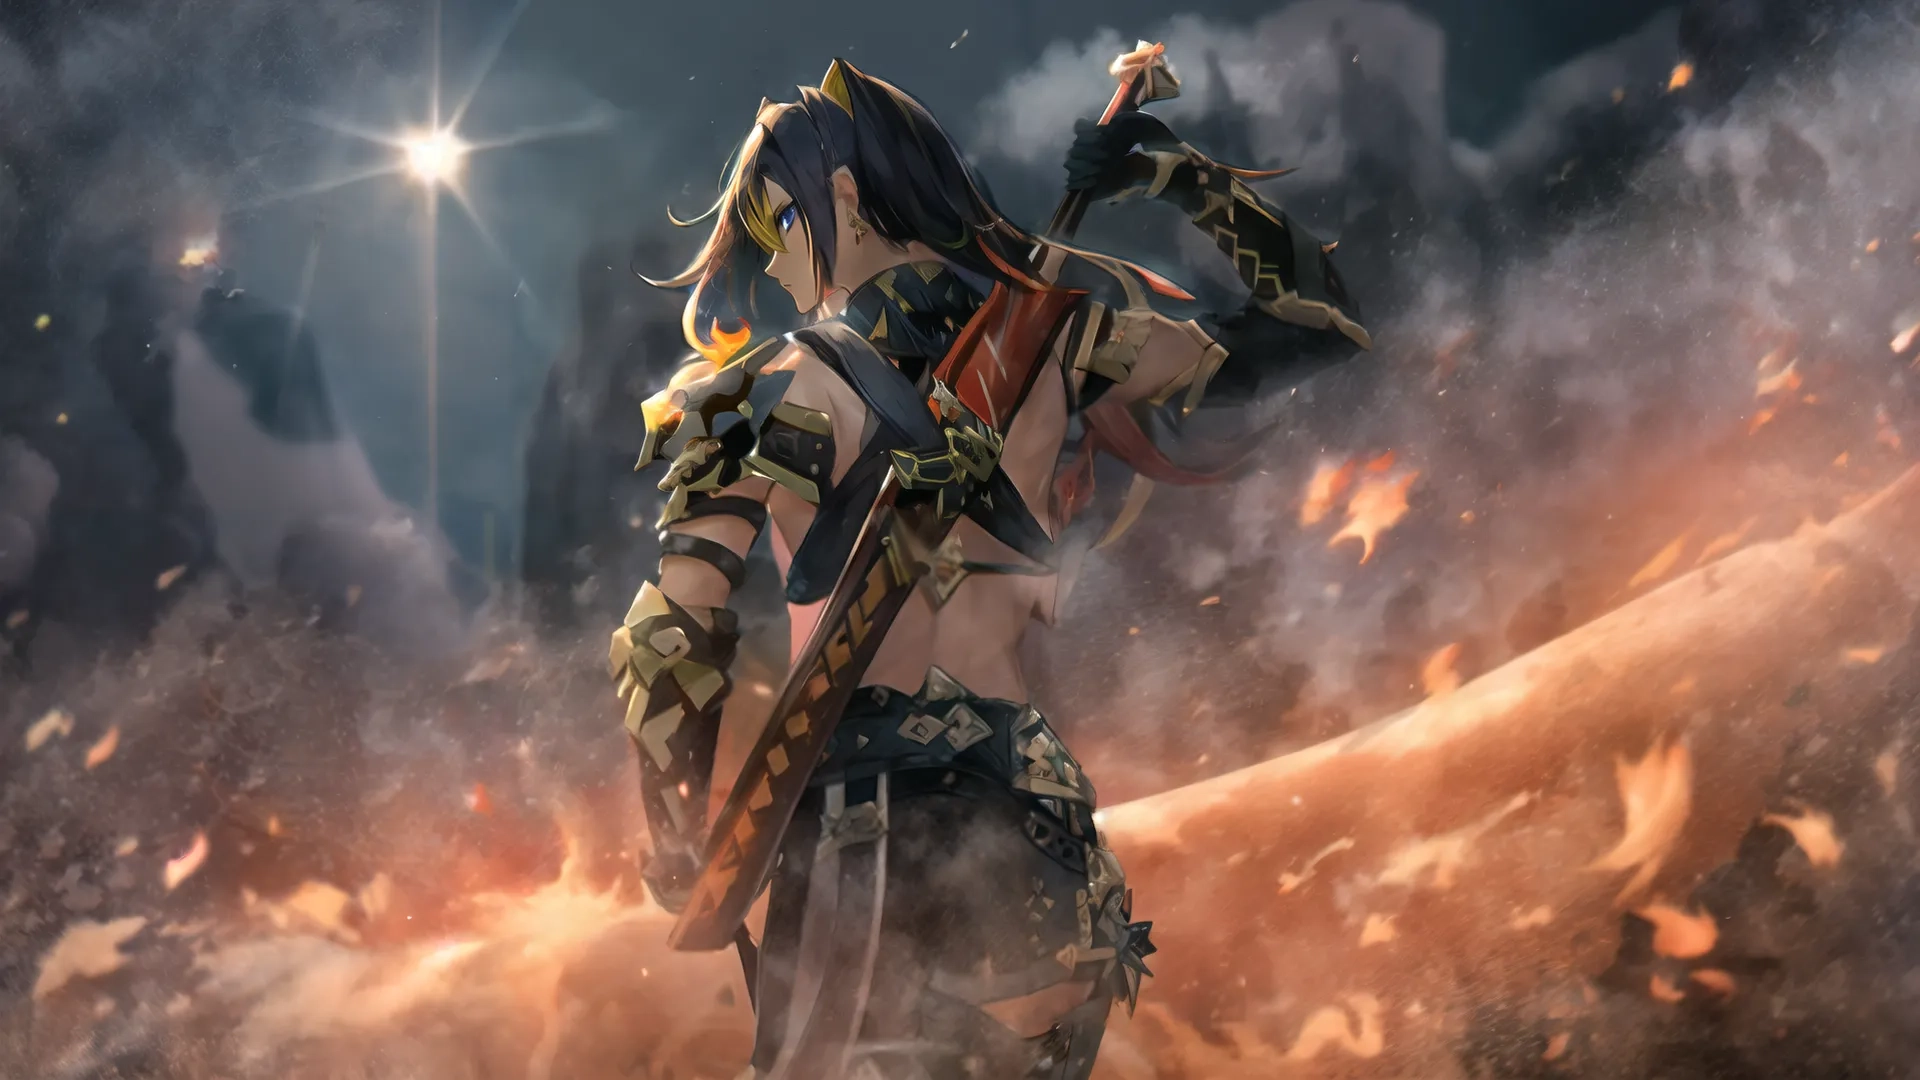 the concept is in game or video game called warrior girl with sword and armor, standing against a backdrop of burning and eerie sky effects
